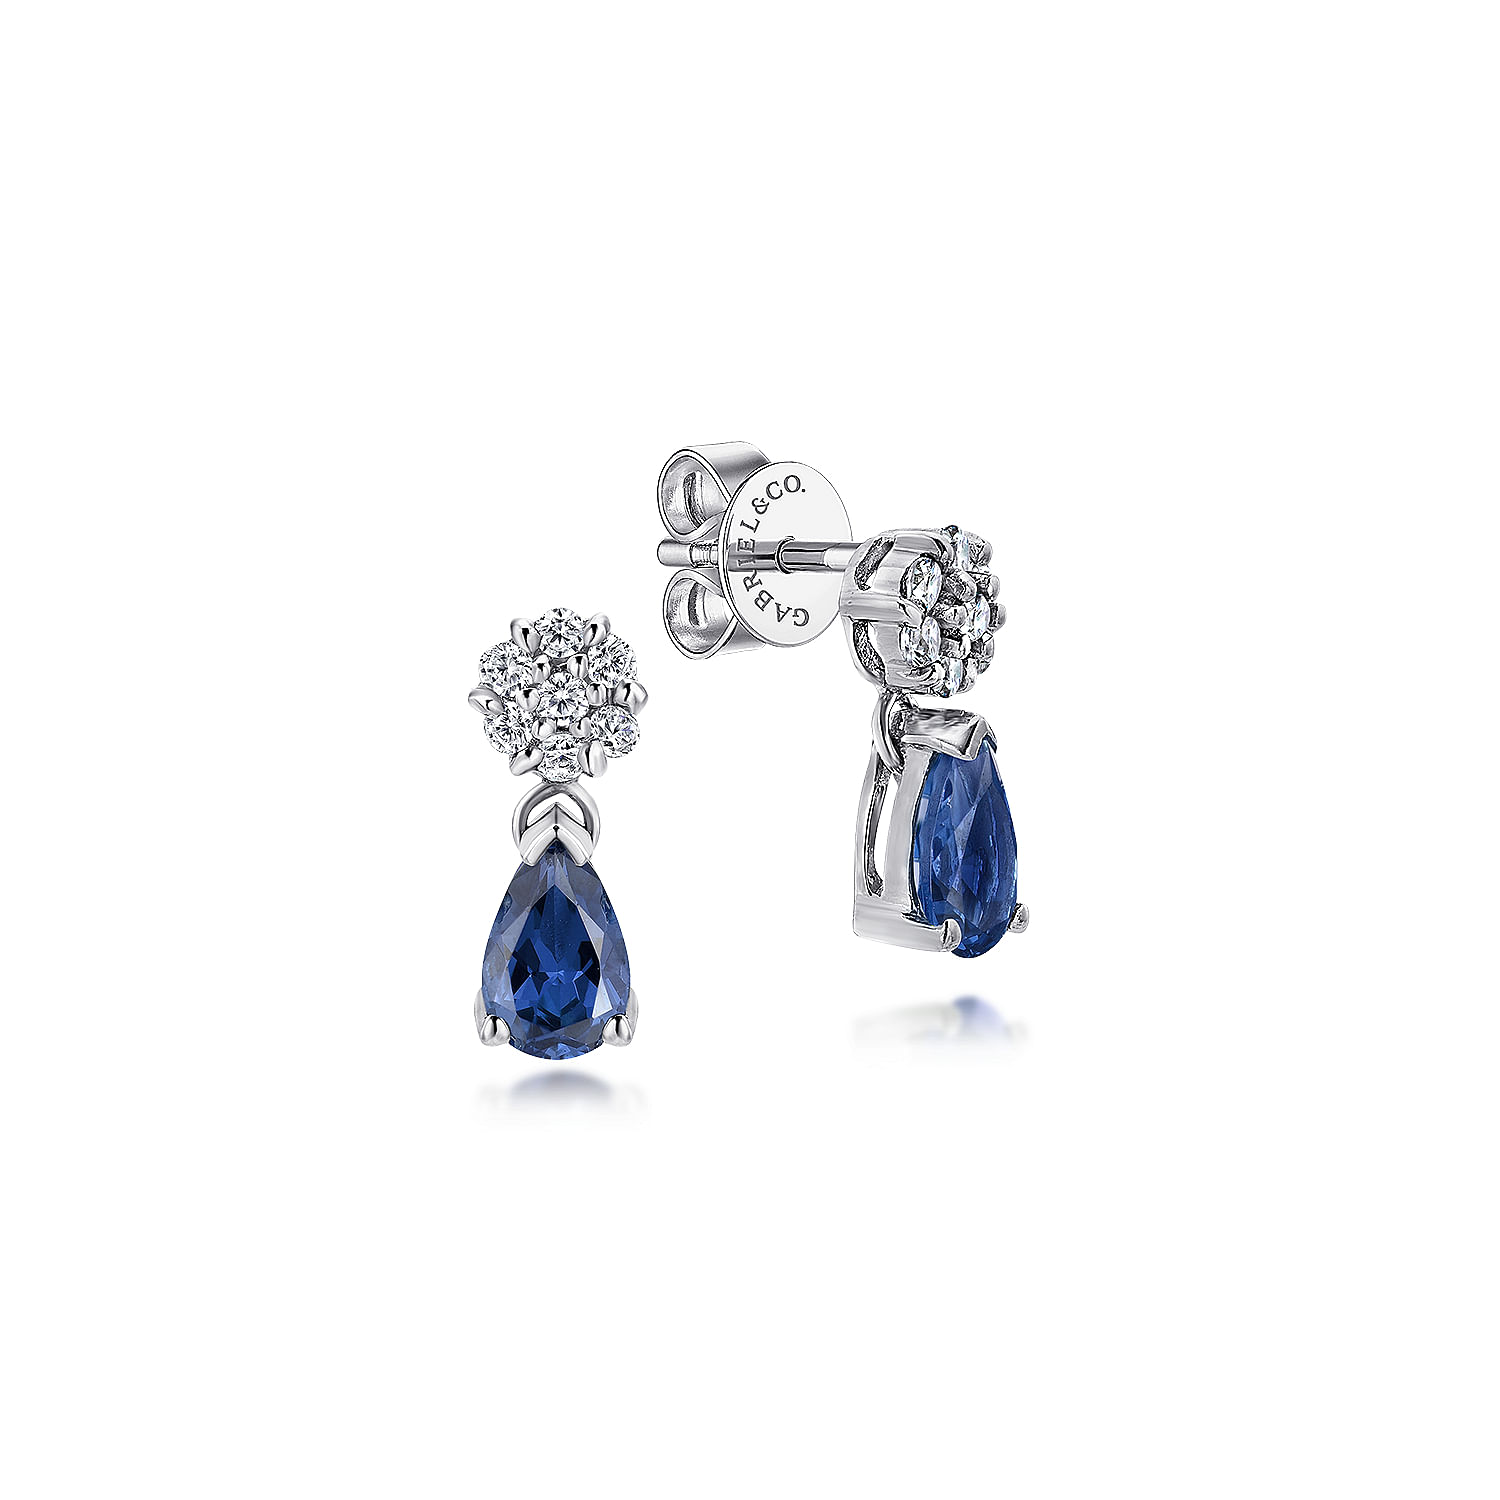 Gabriel - 14K White Gold Floral Diamond Stud Earrings with Pear Shaped Sapphire Drops